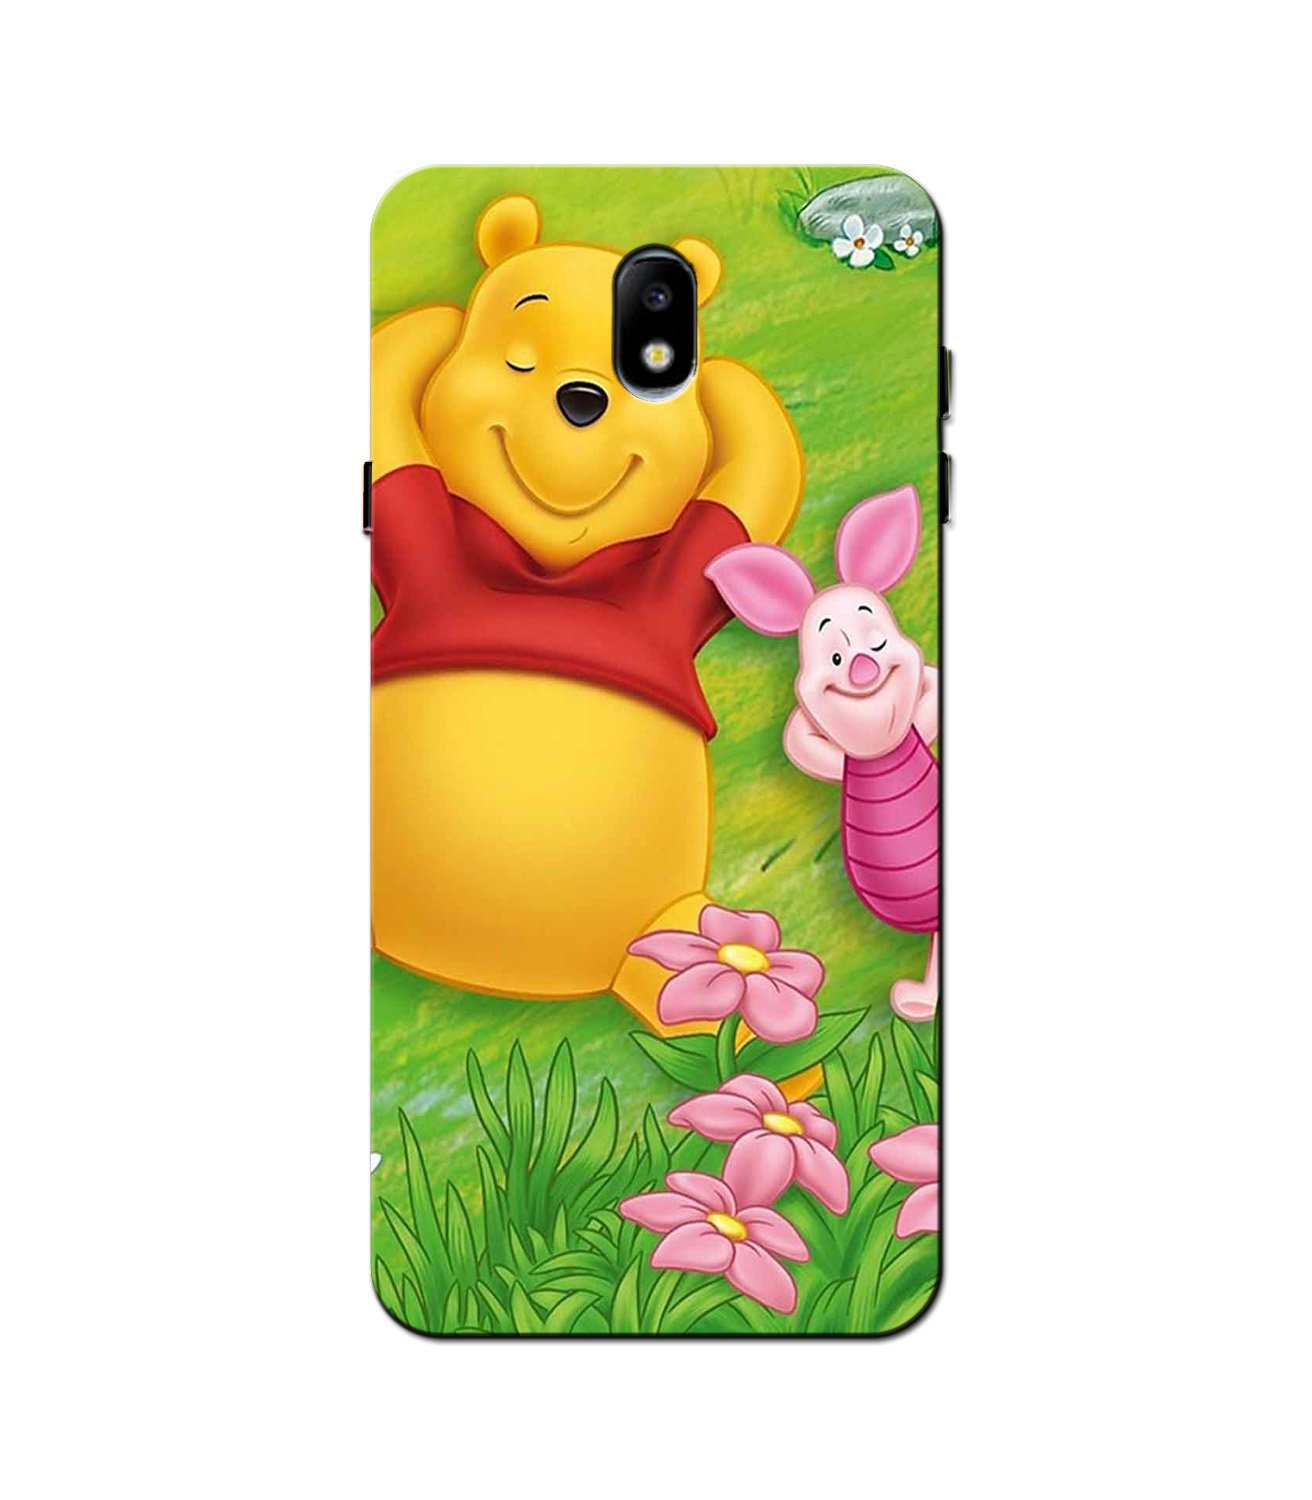 Winnie The Pooh Mobile Back Case for Galaxy J3 Pro  (Design - 348)